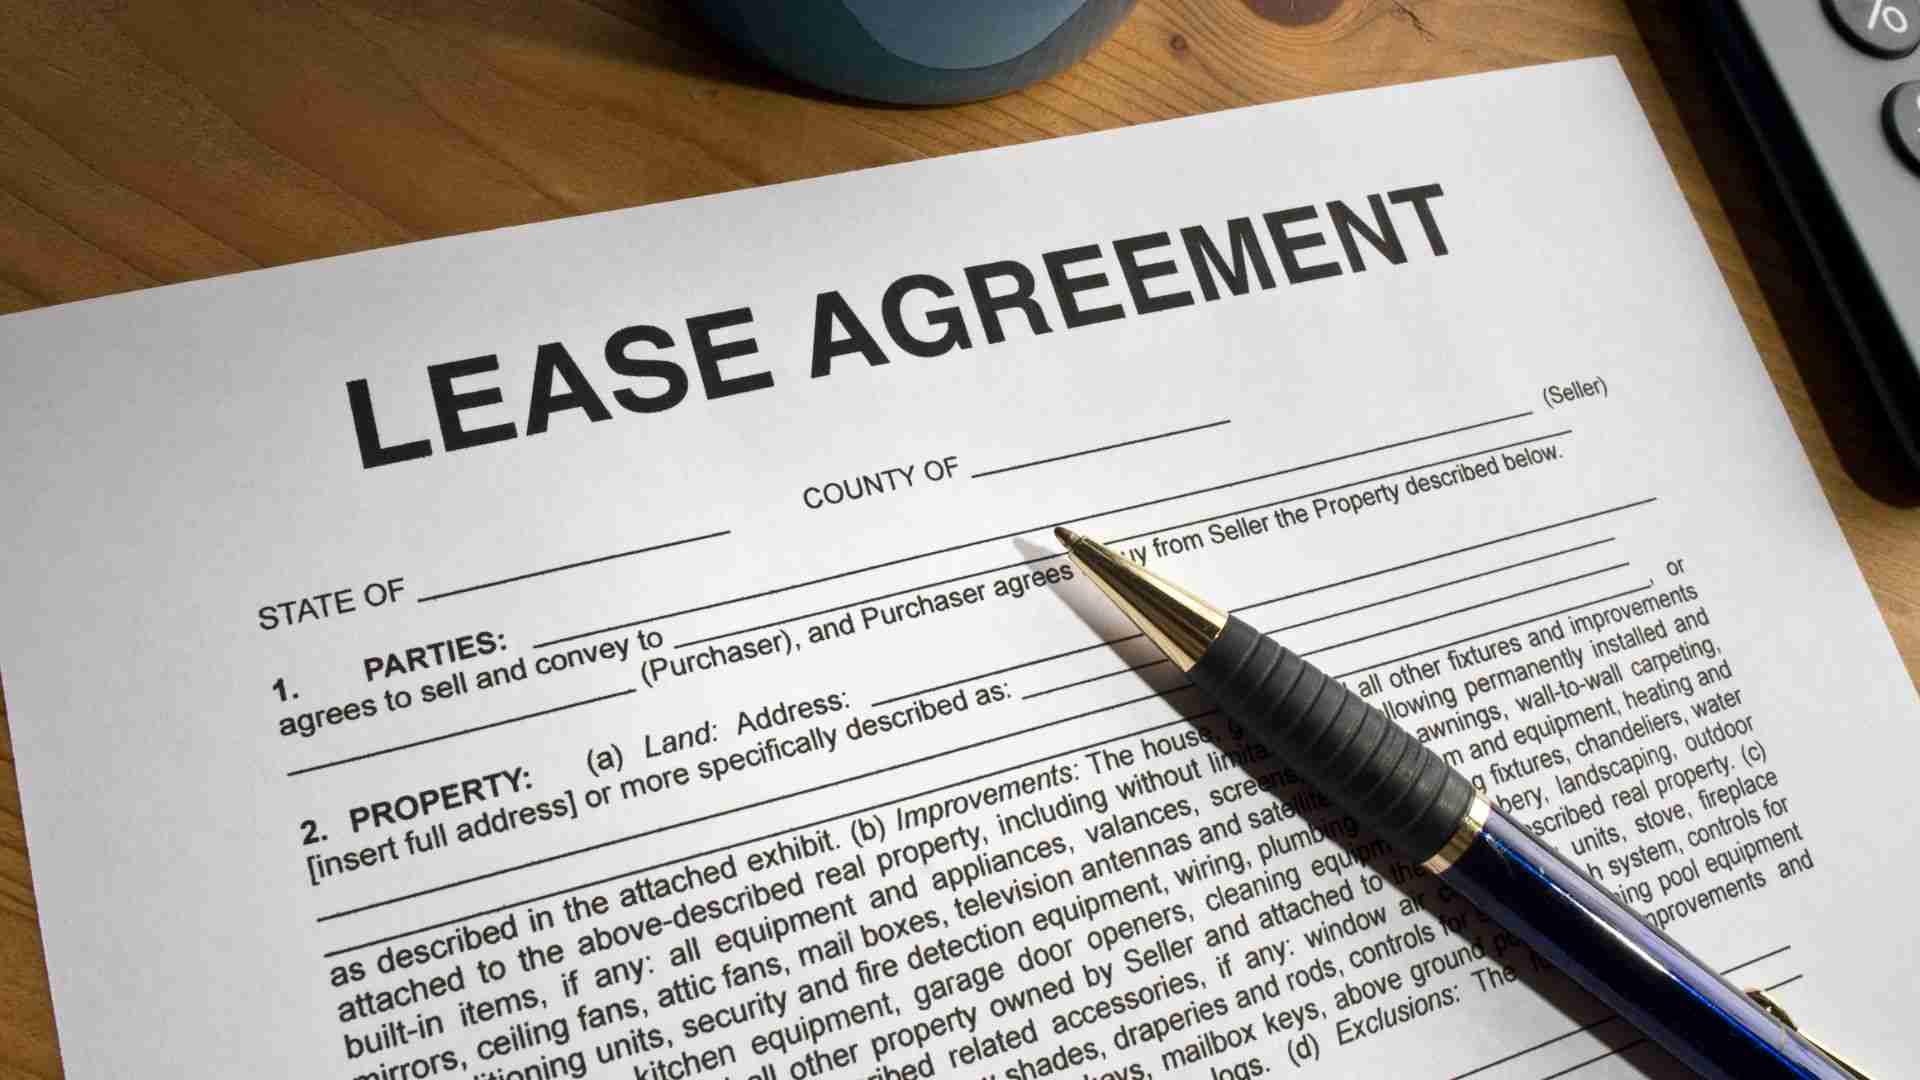 An unsigned lease agreement on a table with a pen.